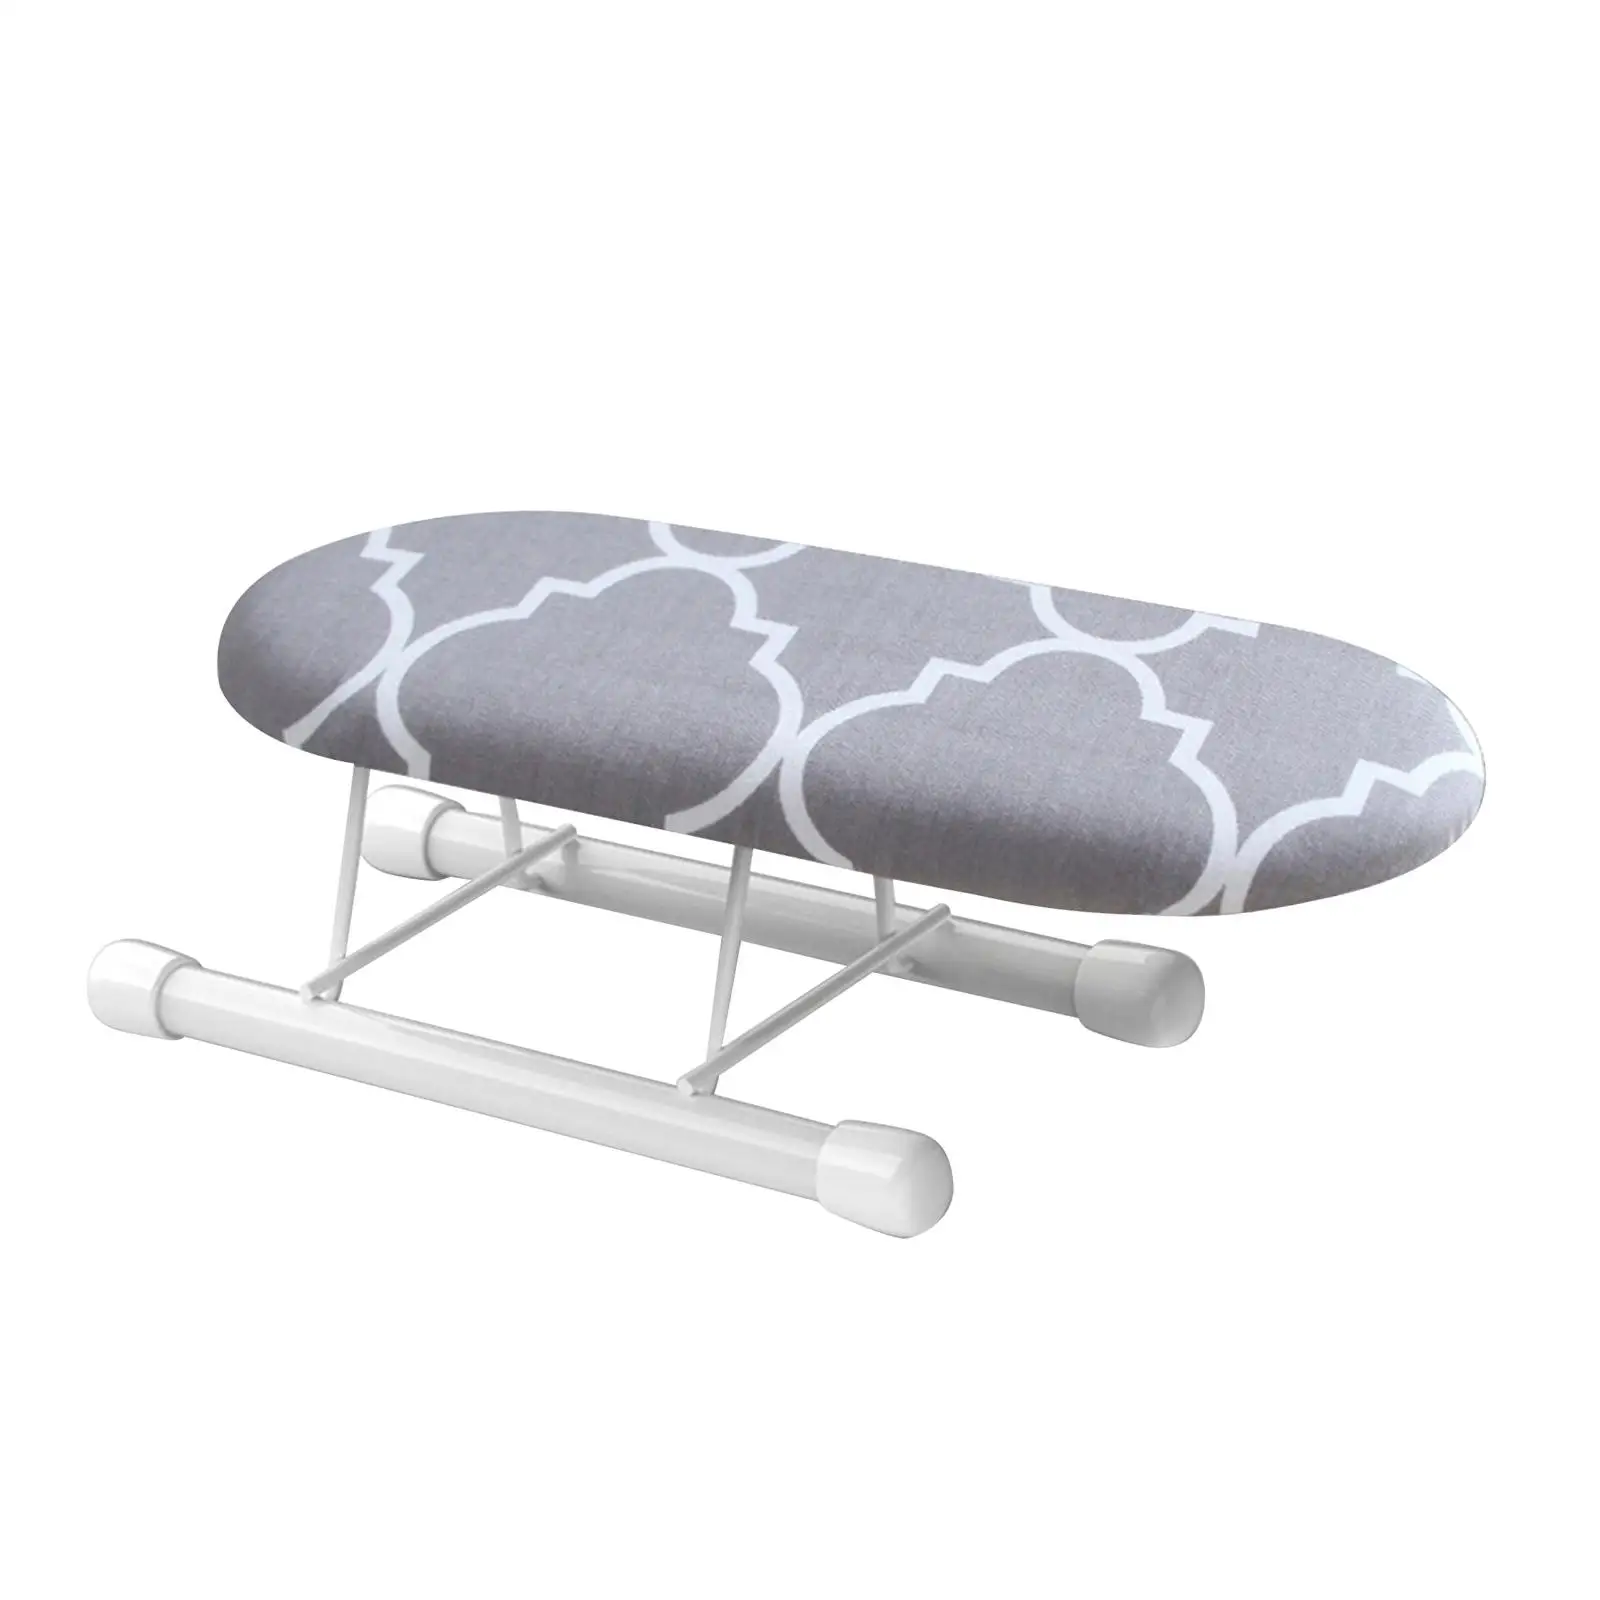 Small Folding Ironing Board Foldable Legs Removable Cover for Home Apartments Home